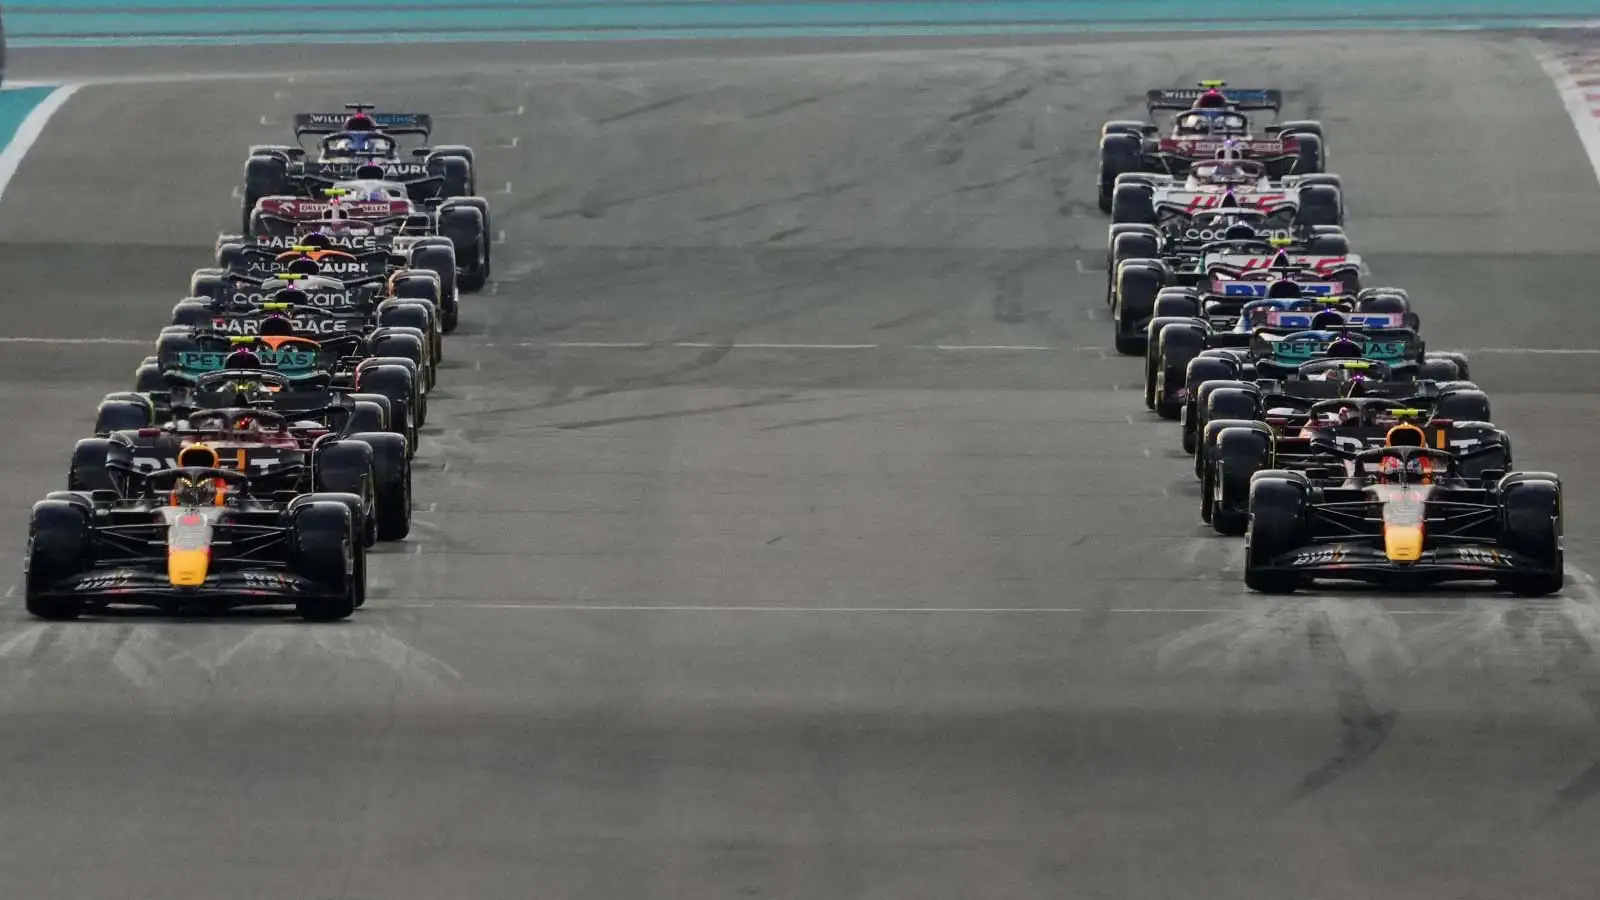 The drivers about to get underway. Abu Dhabi November 2022 F1 2023.